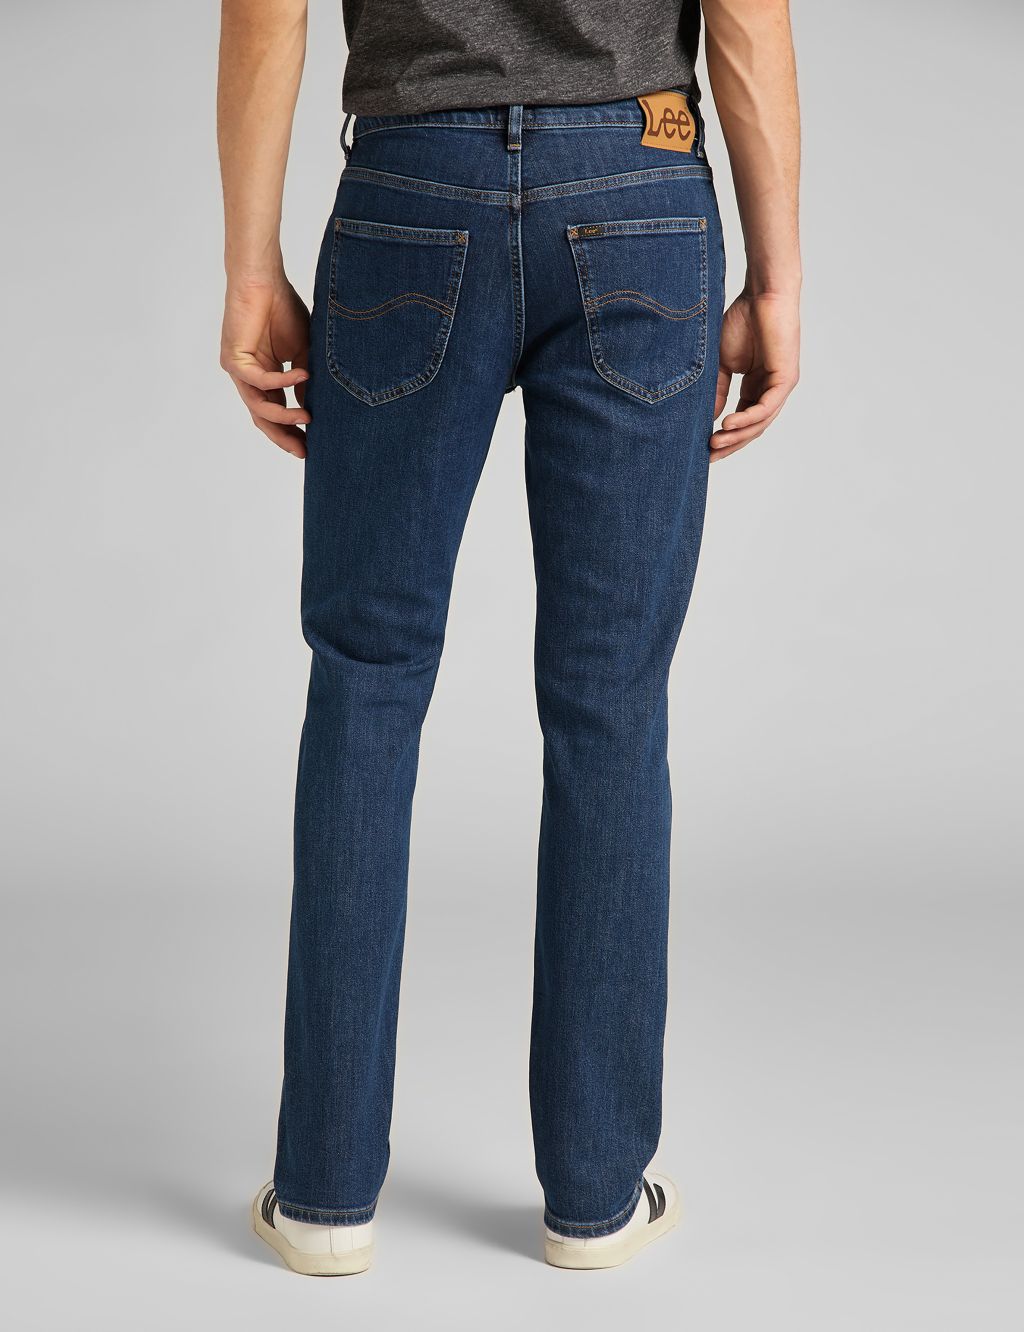 Buy Brooklyn Straight Fit Jeans | Lee | M&S